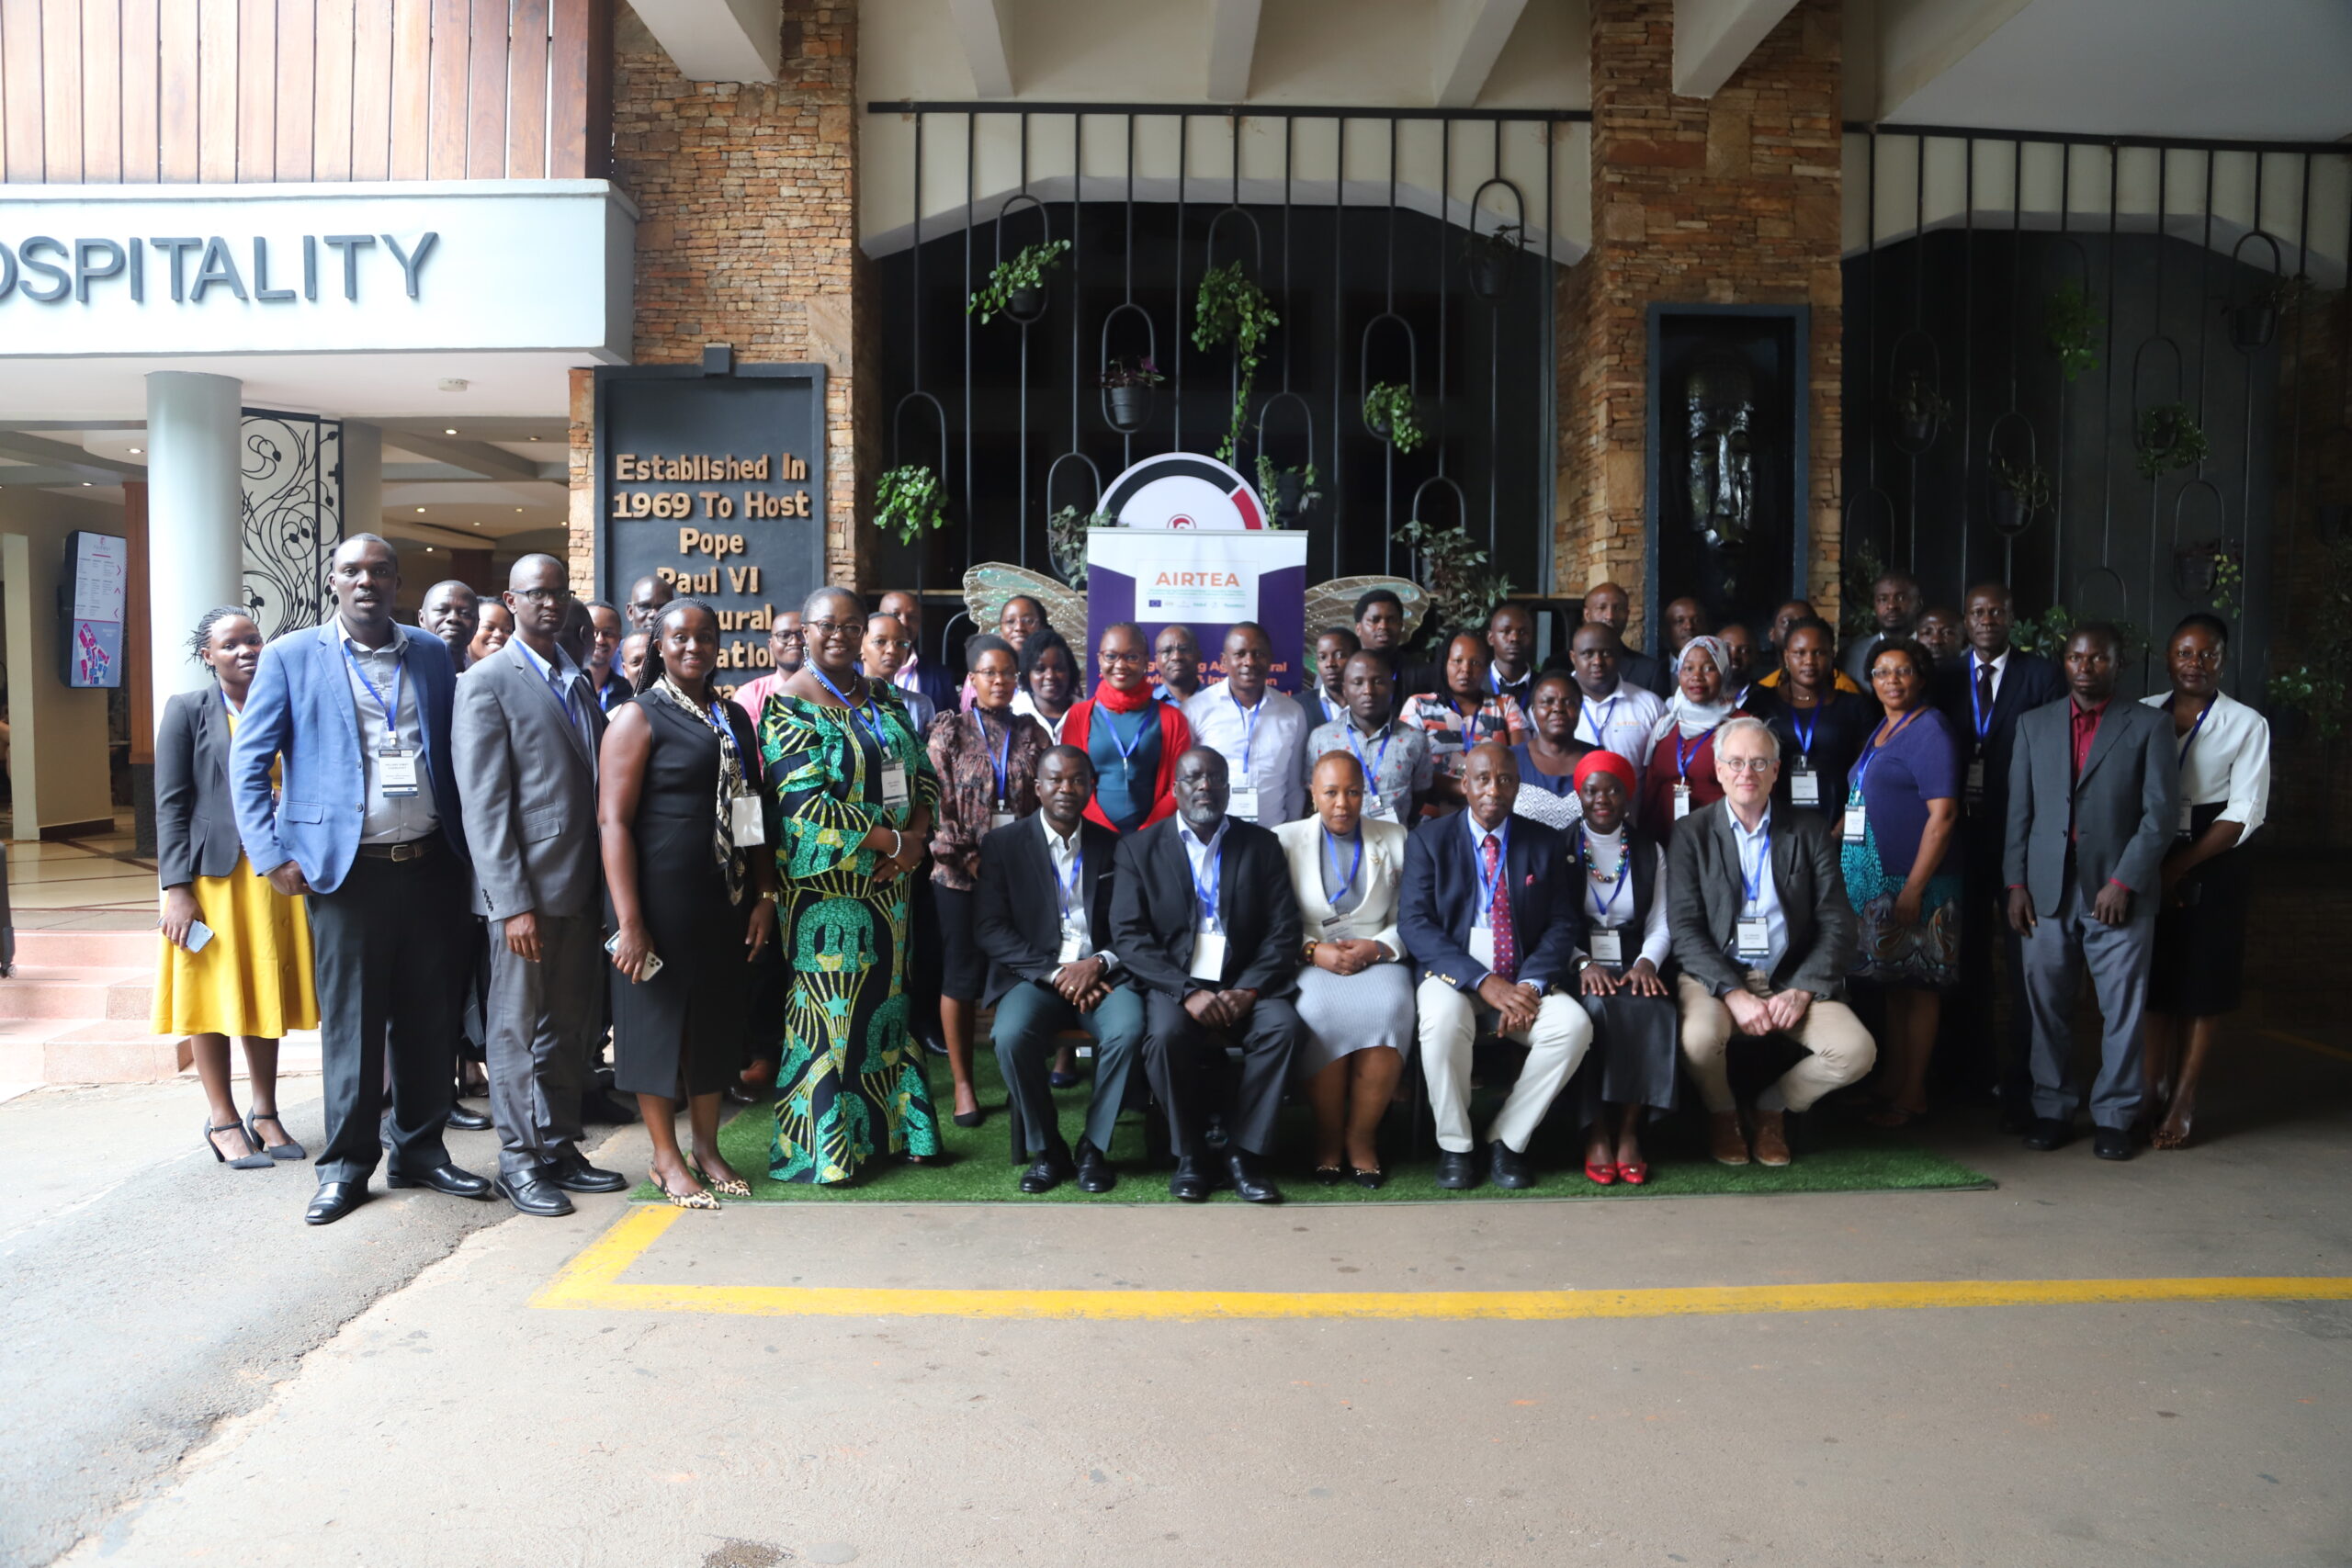 Annual review meeting of AIRTEA Project stakeholders in Kampala, Uganda